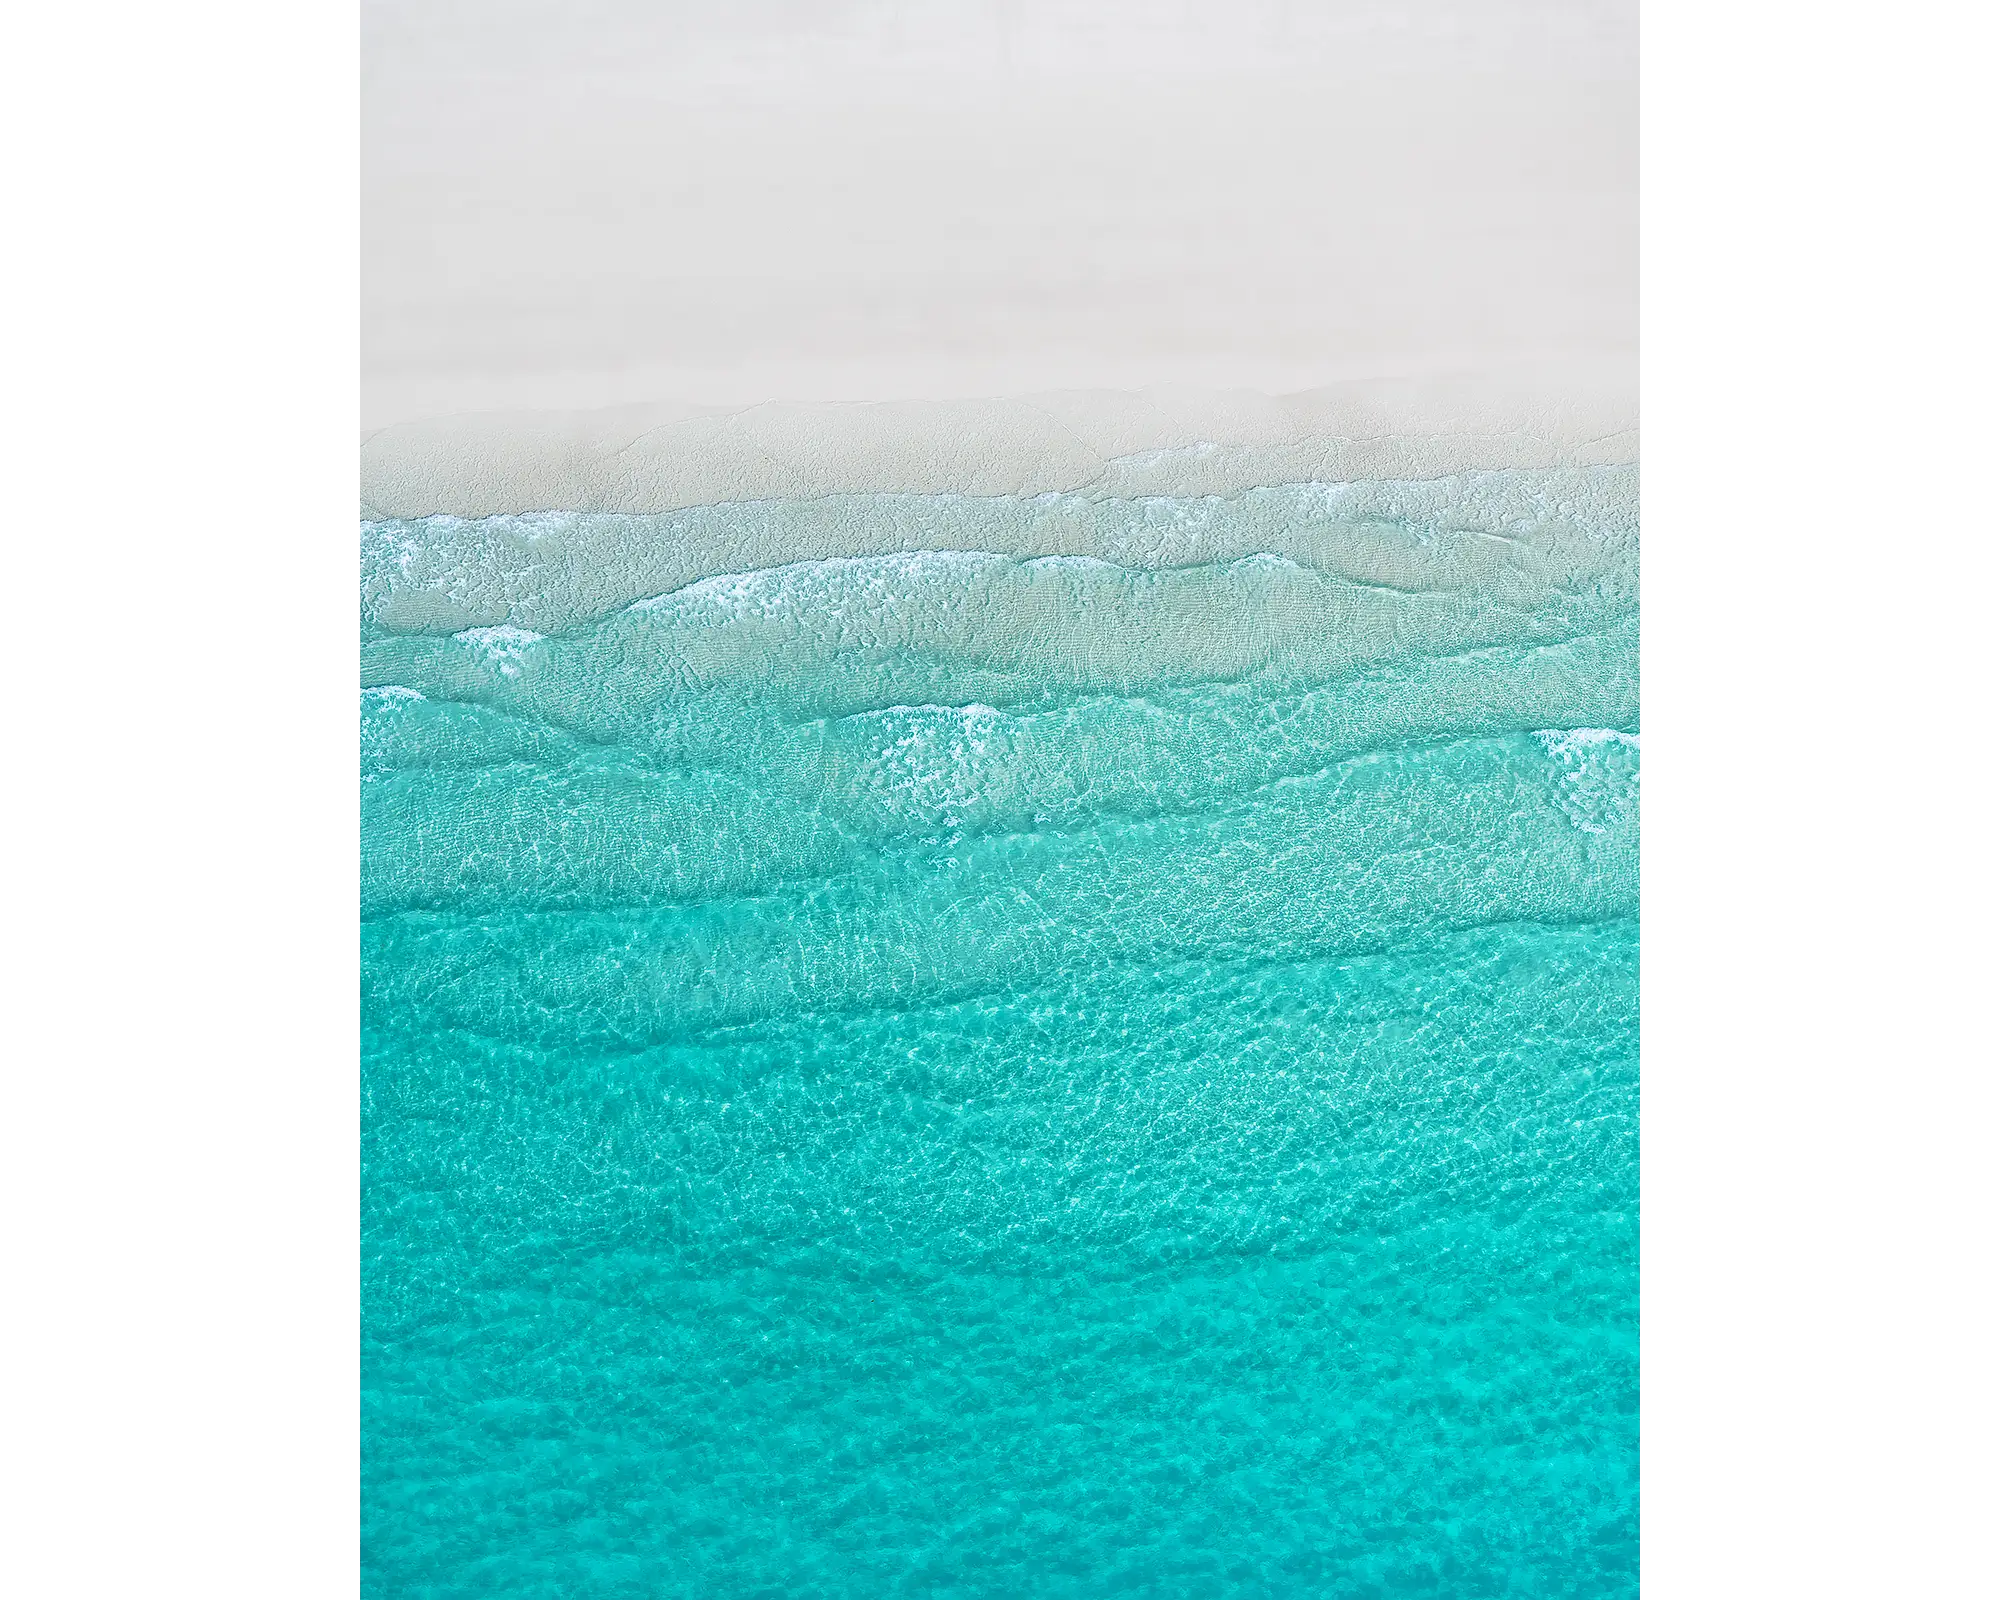 Tranquility - Aerial view of waves and white sand at Whitehaven Beach, Whitsunday Island, Queensland, Australia.